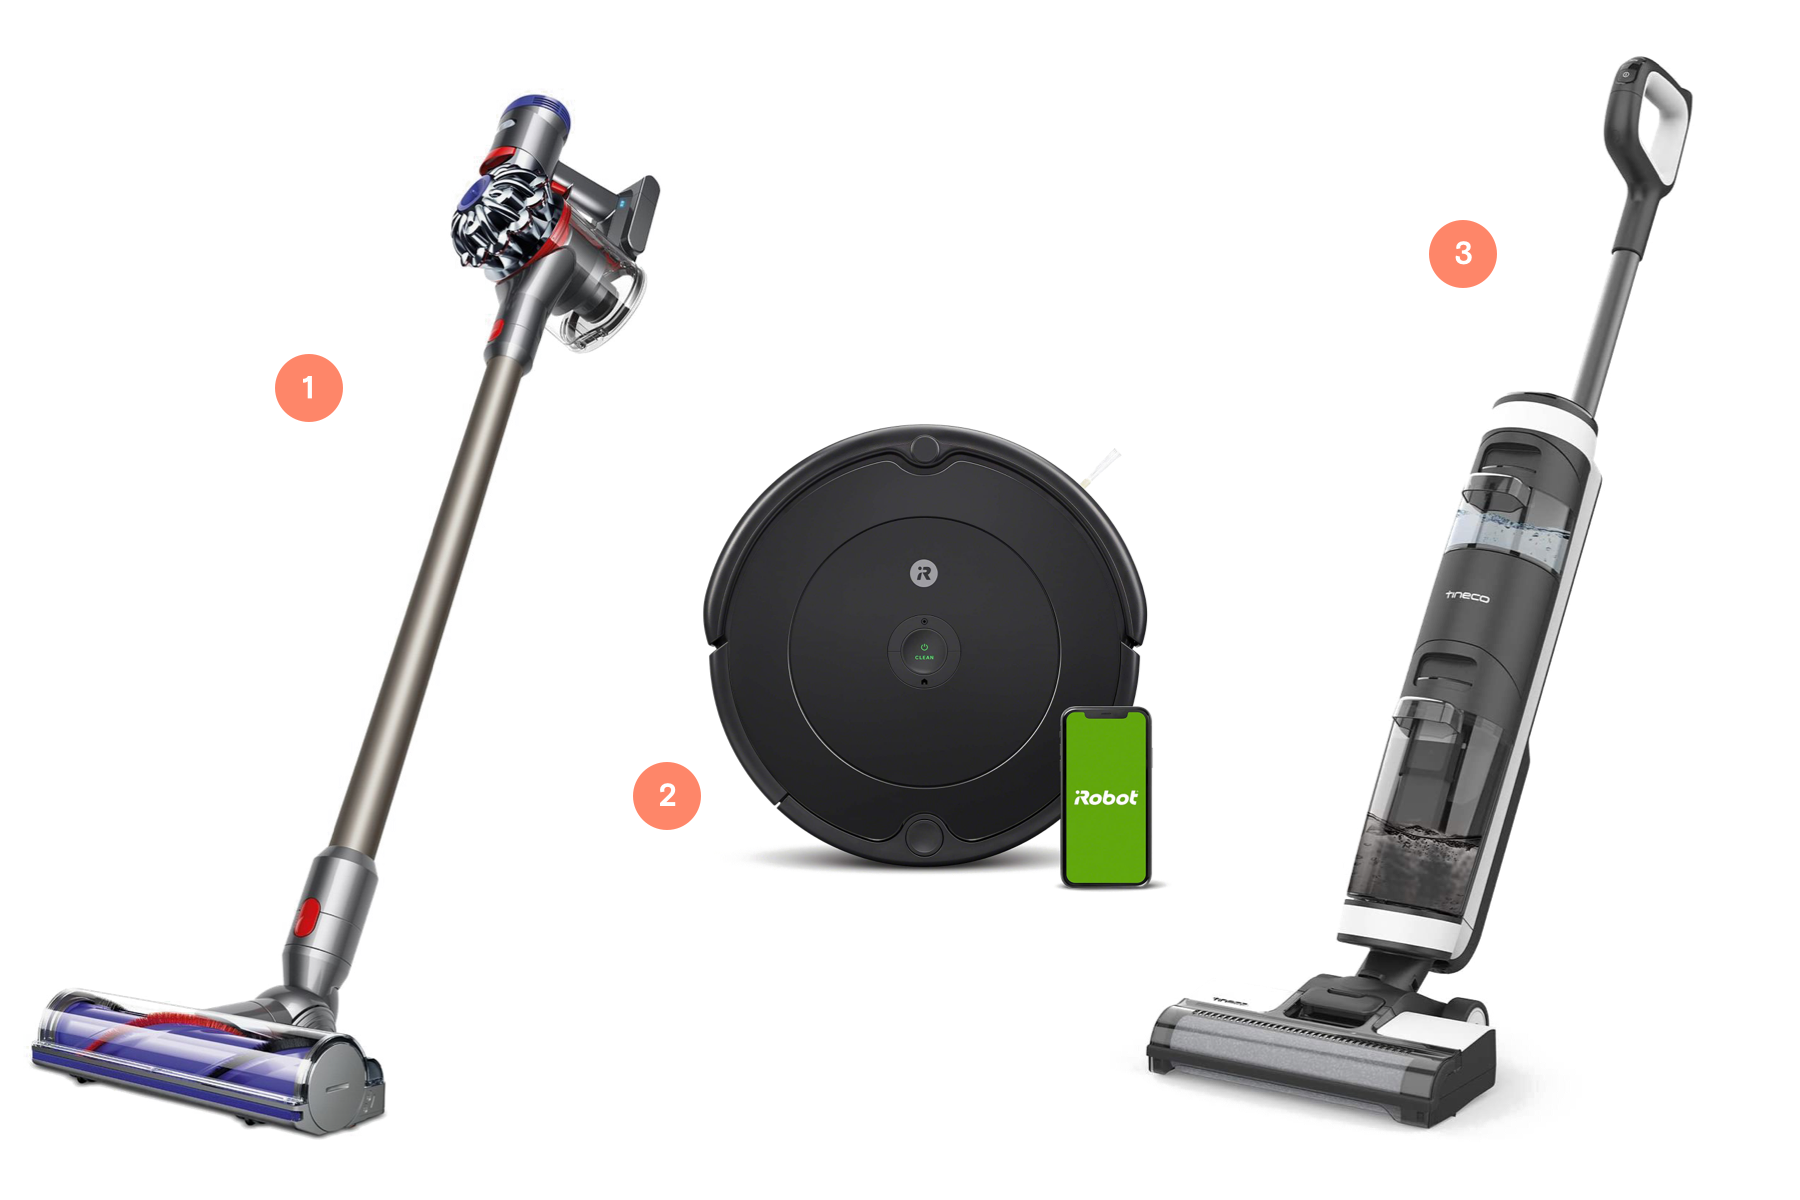 Three vacuum cleaners, as recommended by the article.